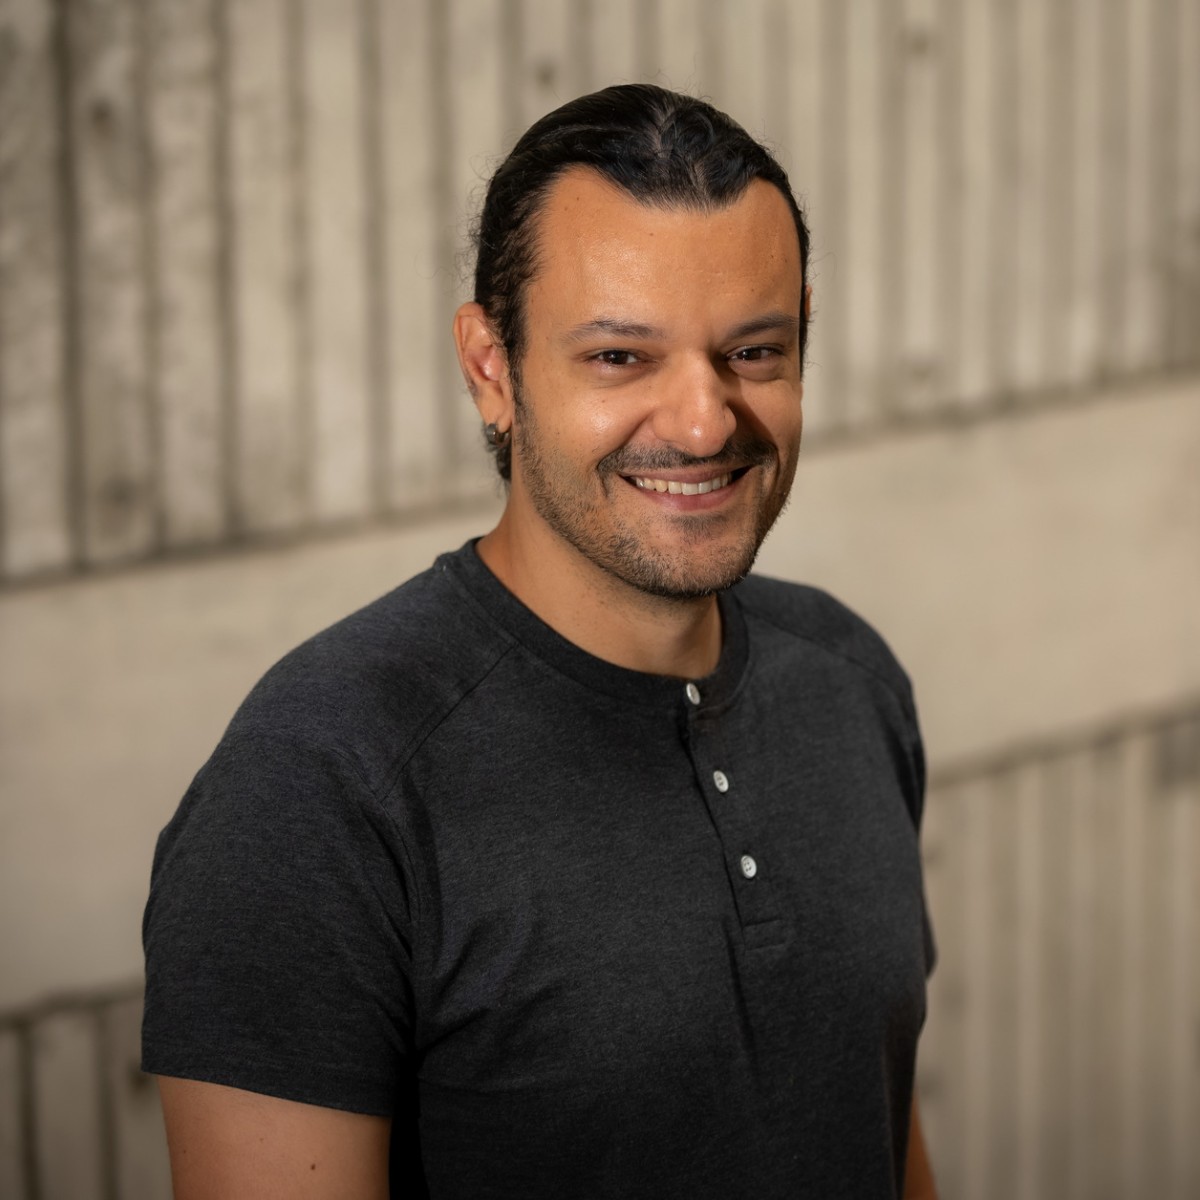 Welcome Arthur Porto, our first curator of artificial intelligence for natural history and biodiversity! In this new position, @ArtPorto will use machine learning and image-based technology to analyze digital repositories of natural history data. #AIatUF
floridamuseum.ufl.edu/science/florid…